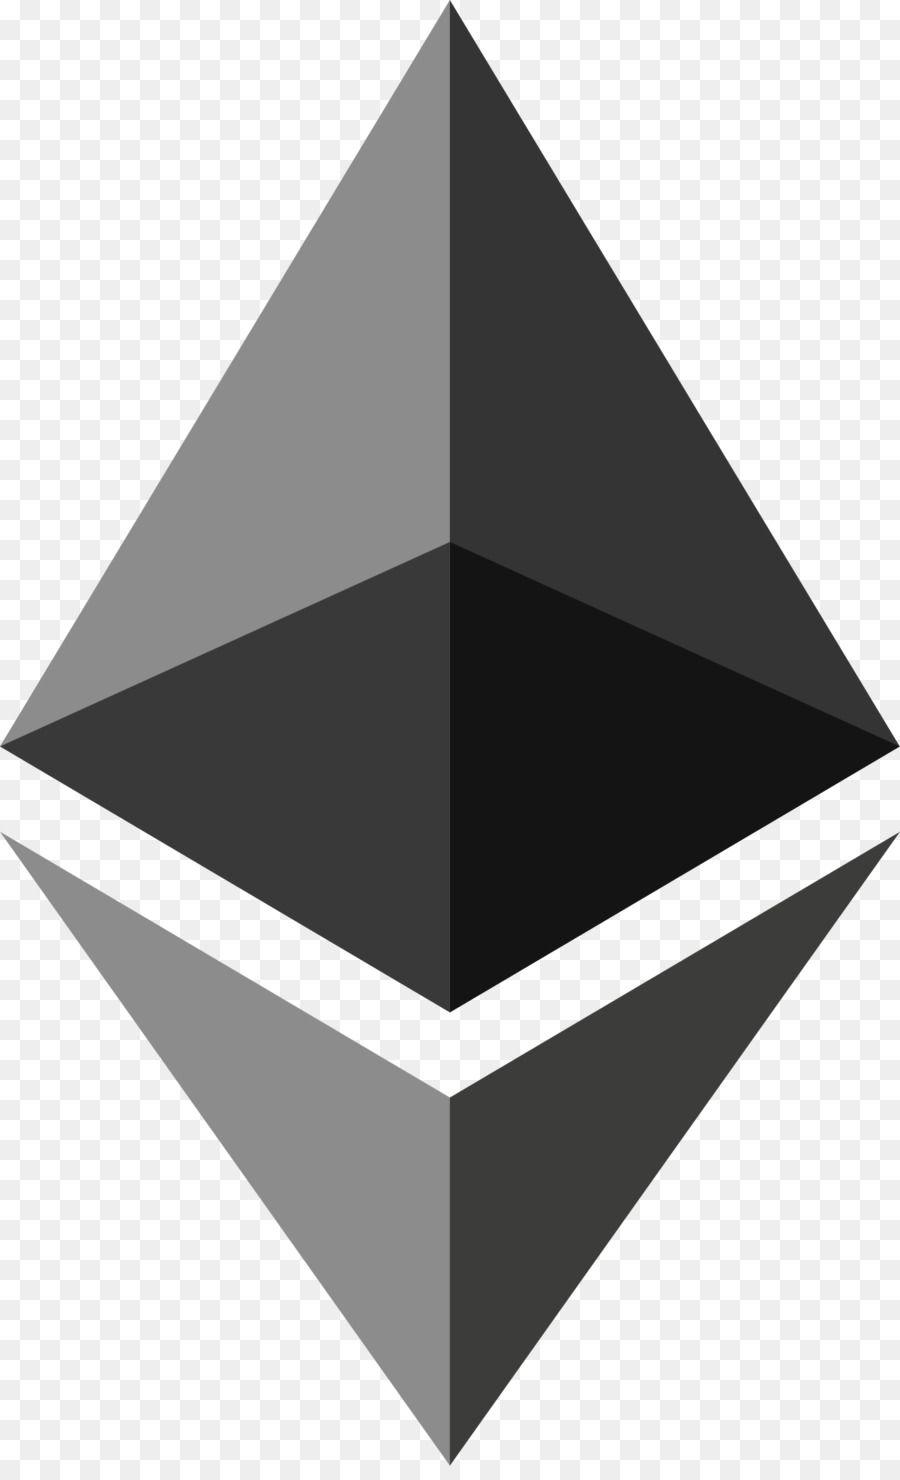 Etherium Blockchain Logo - Ethereum Blockchain Cryptocurrency Logo - coin stack png download ...